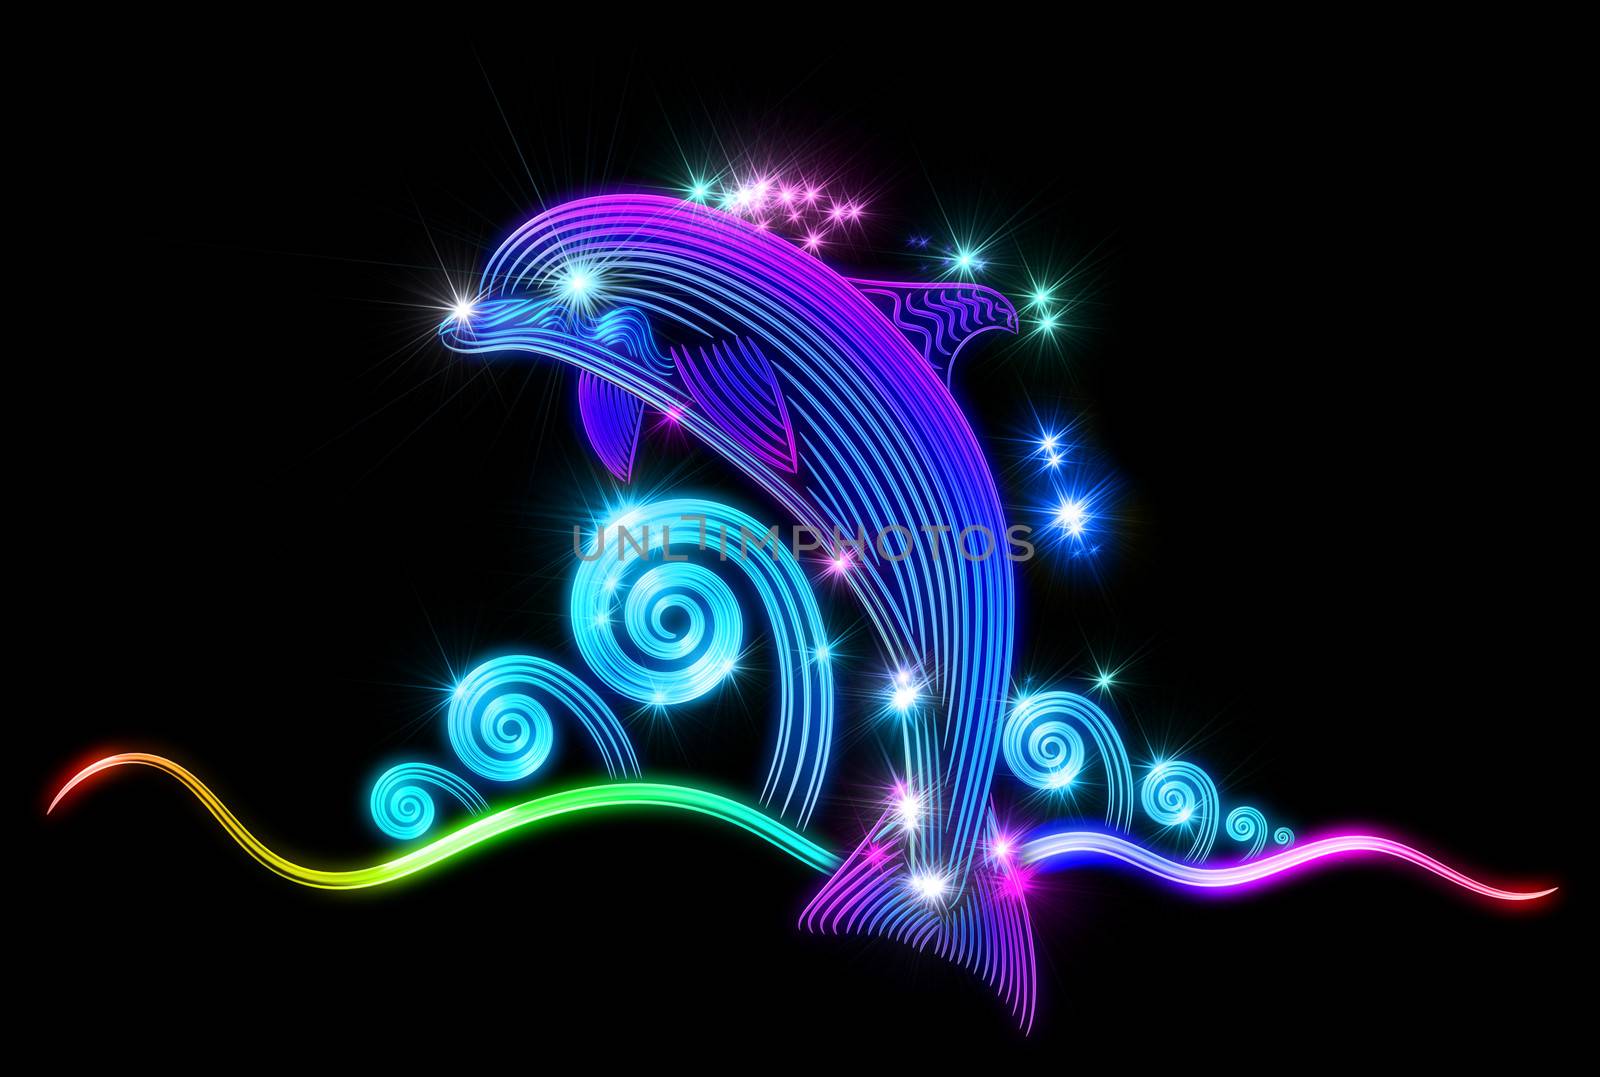 Beautiful swimming dolphin jumped from blue tropical ocean and slides on waves with bubbles and splashes of water. Water drops refract sunlight as a prism and visually similar to the shining stars.